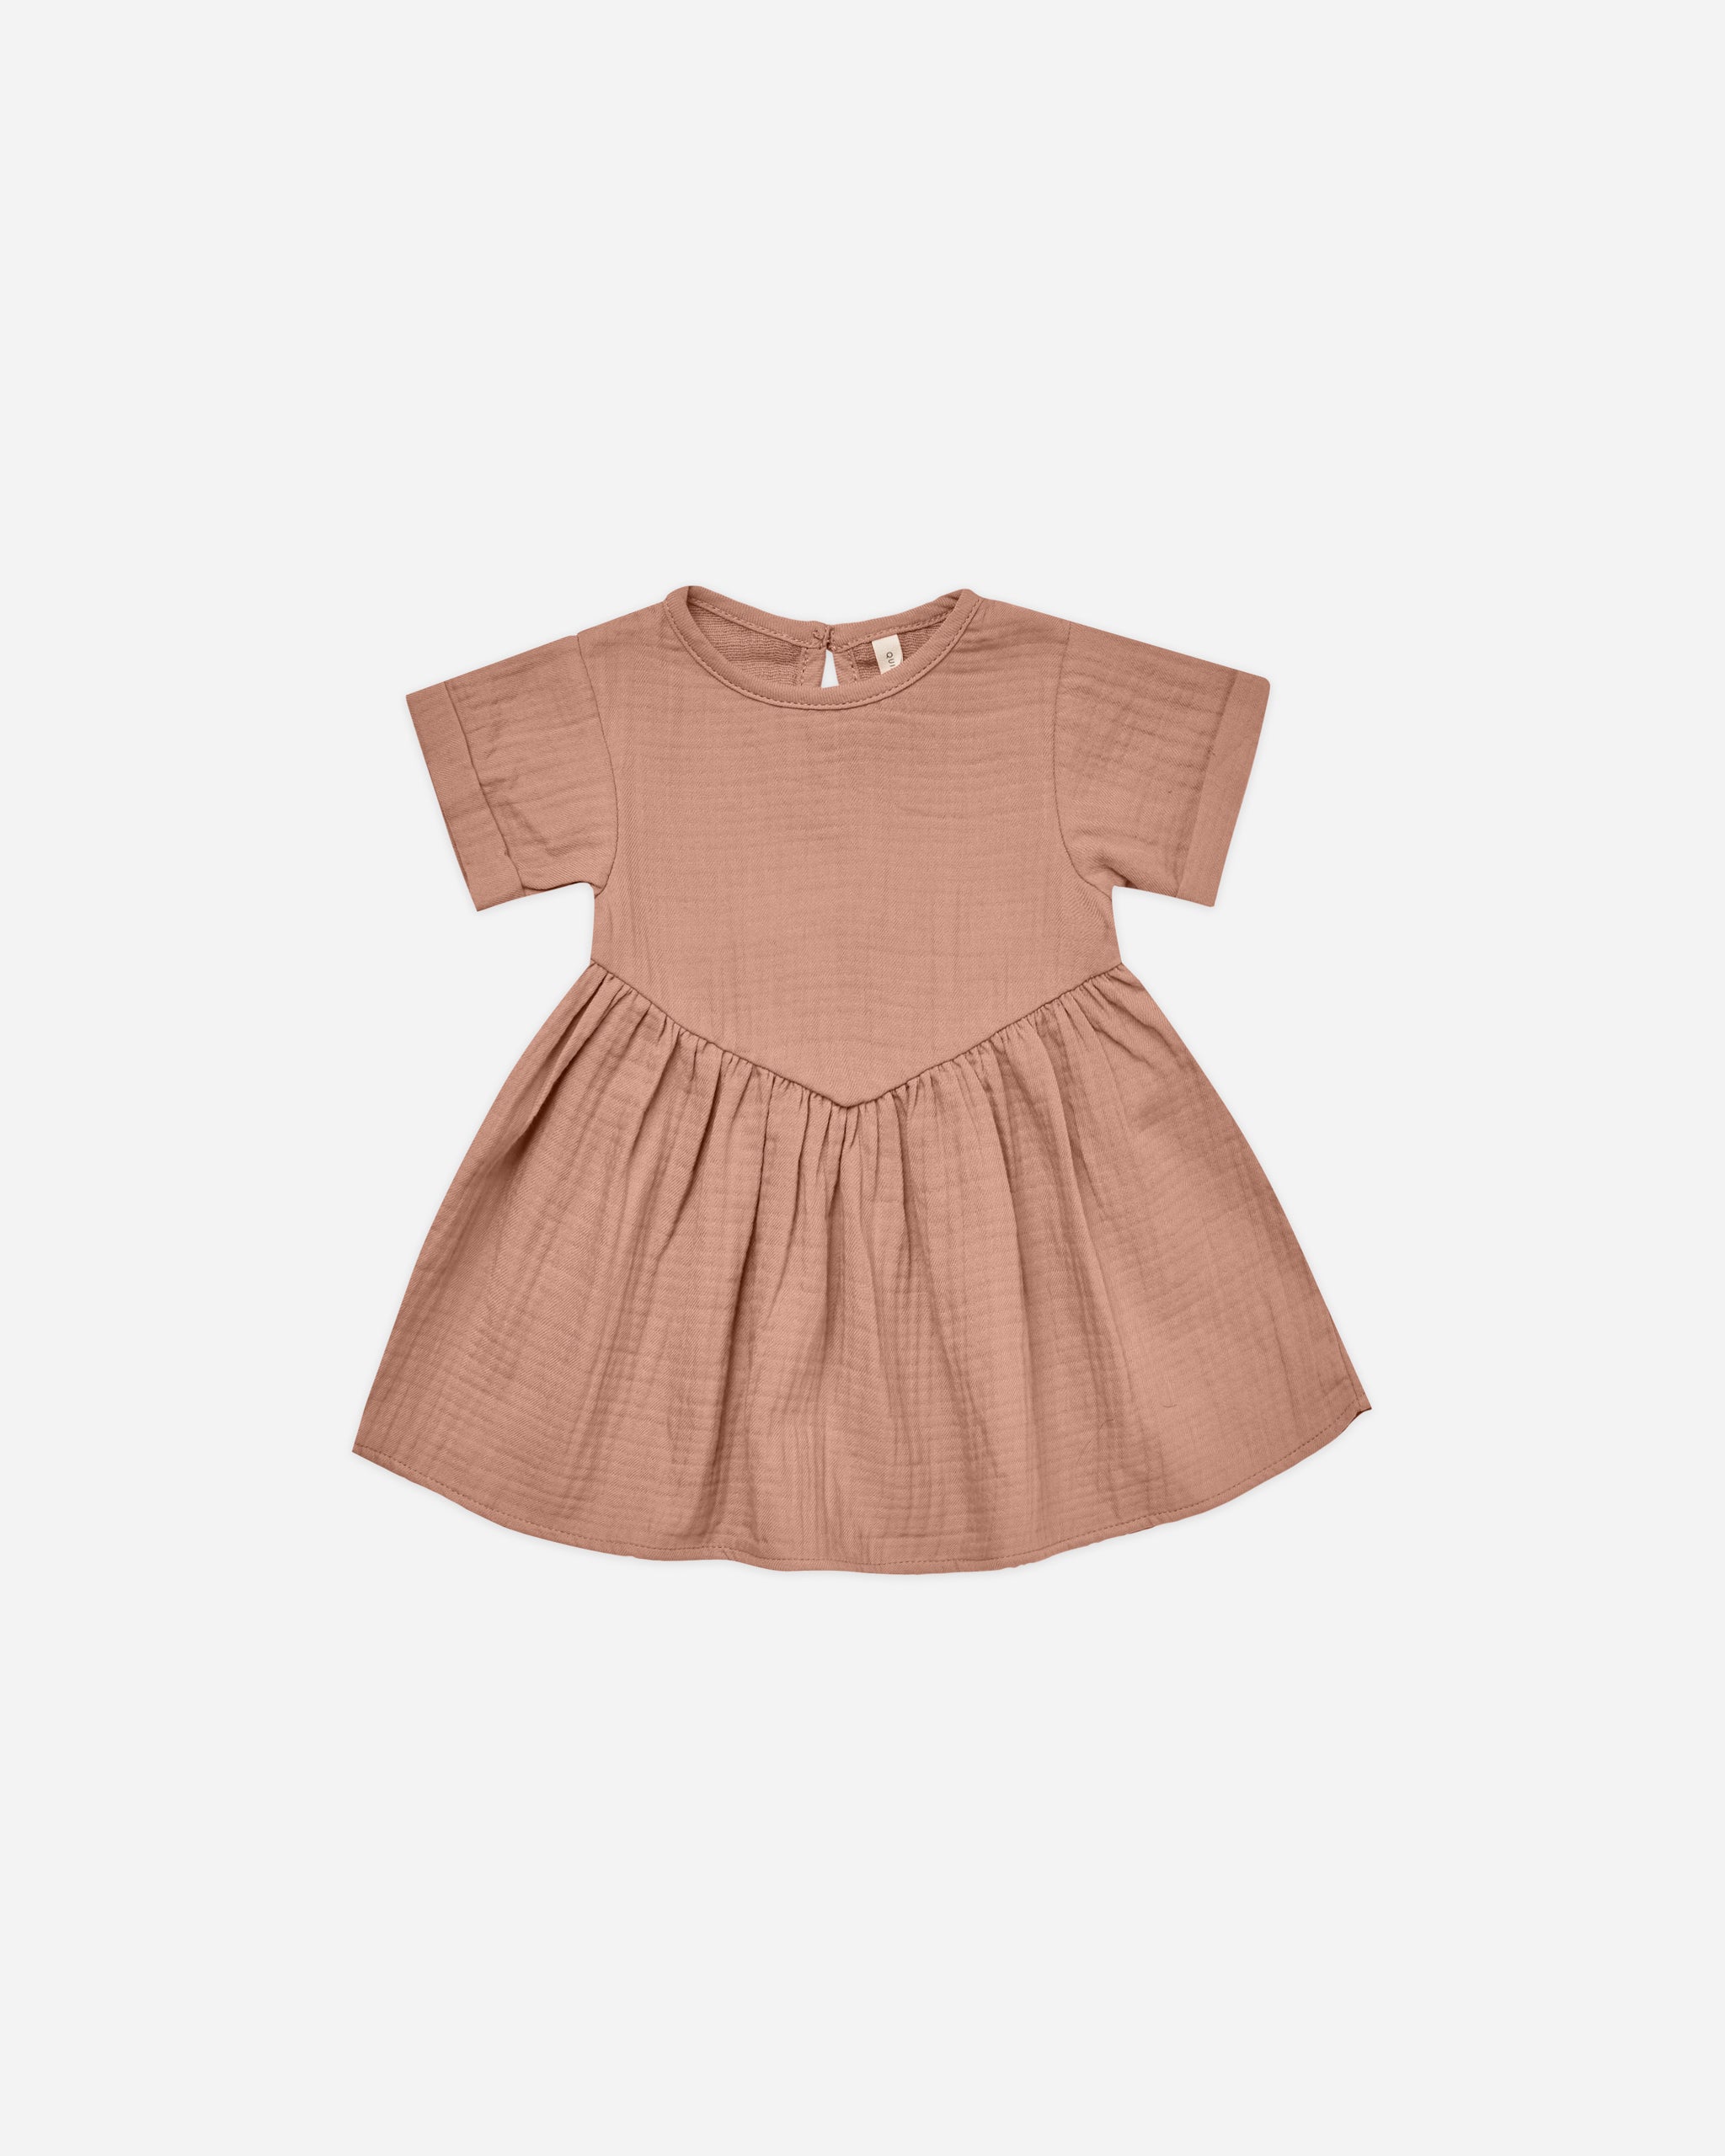 Brielle Dress || Rose - Rylee + Cru | Kids Clothes | Trendy Baby Clothes | Modern Infant Outfits |